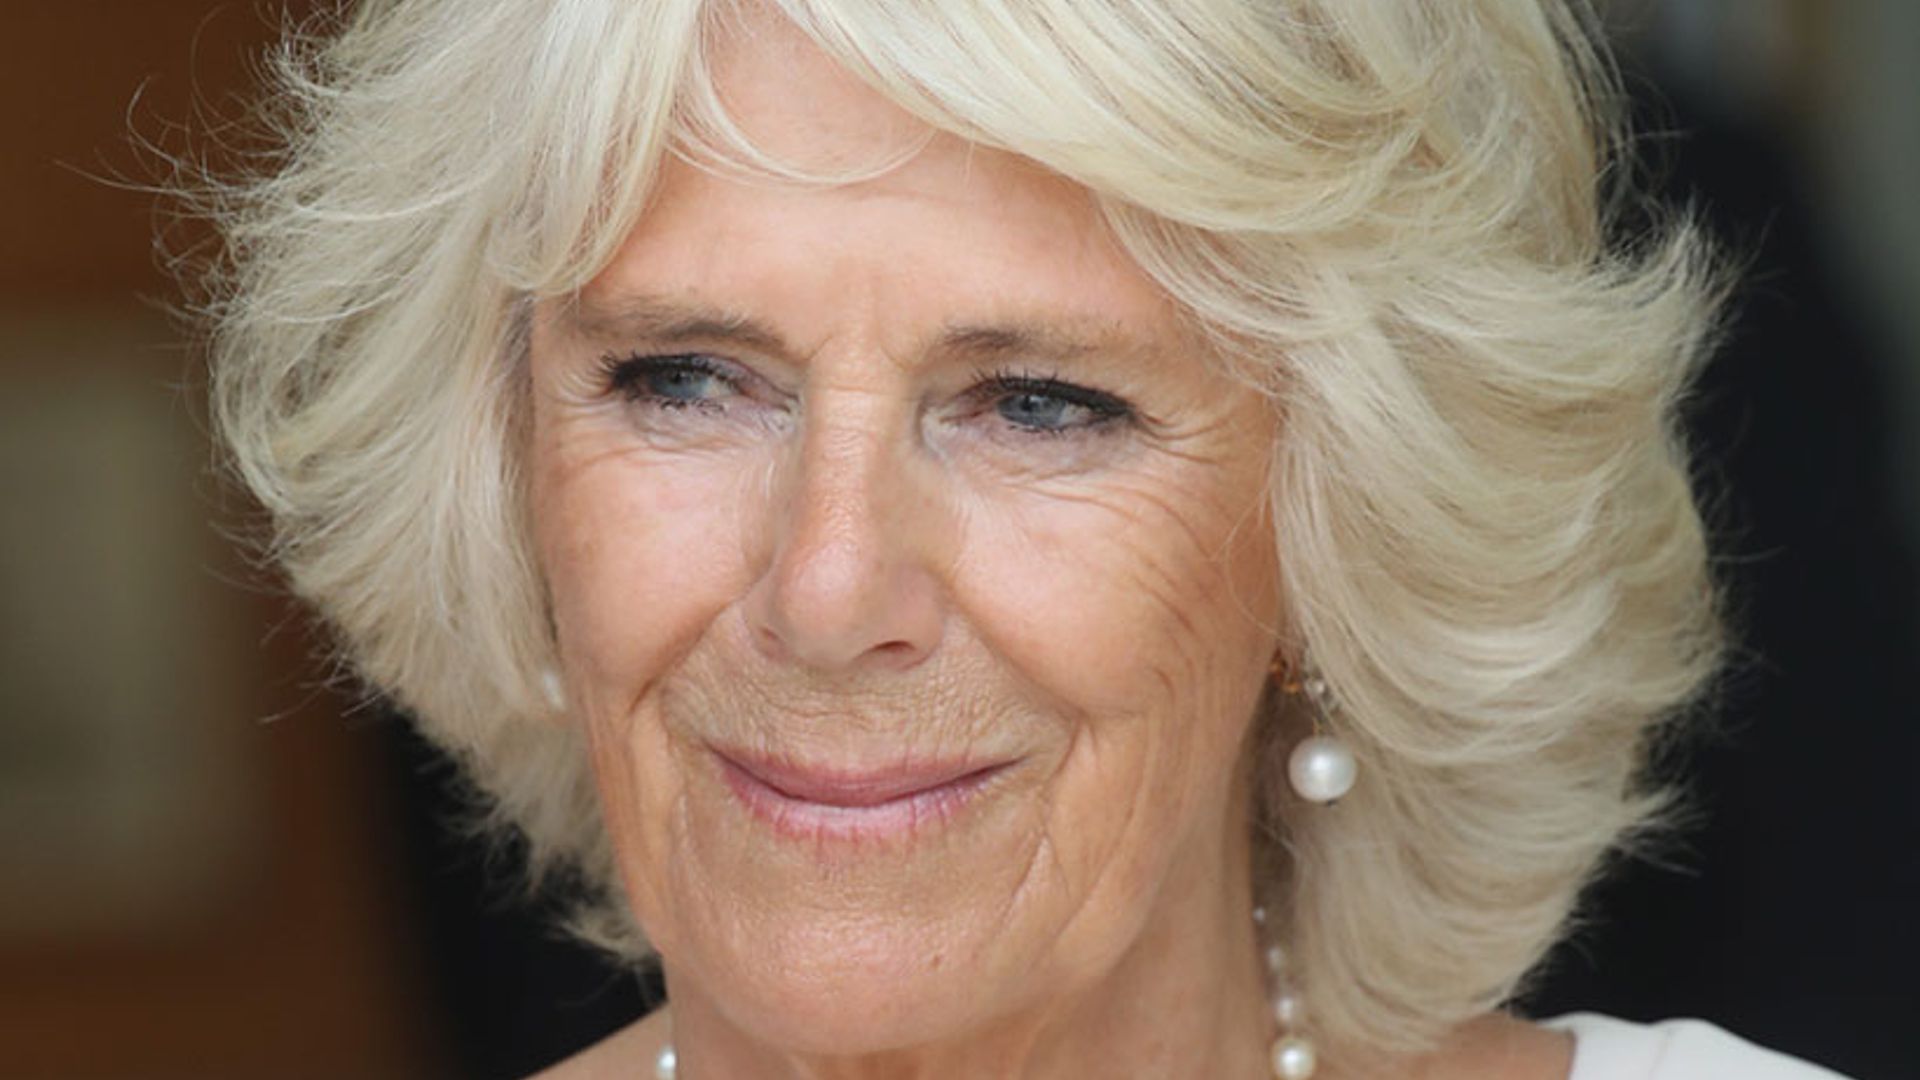 The Duchess of Cornwall is pretty in pink and wow, what an outfit!